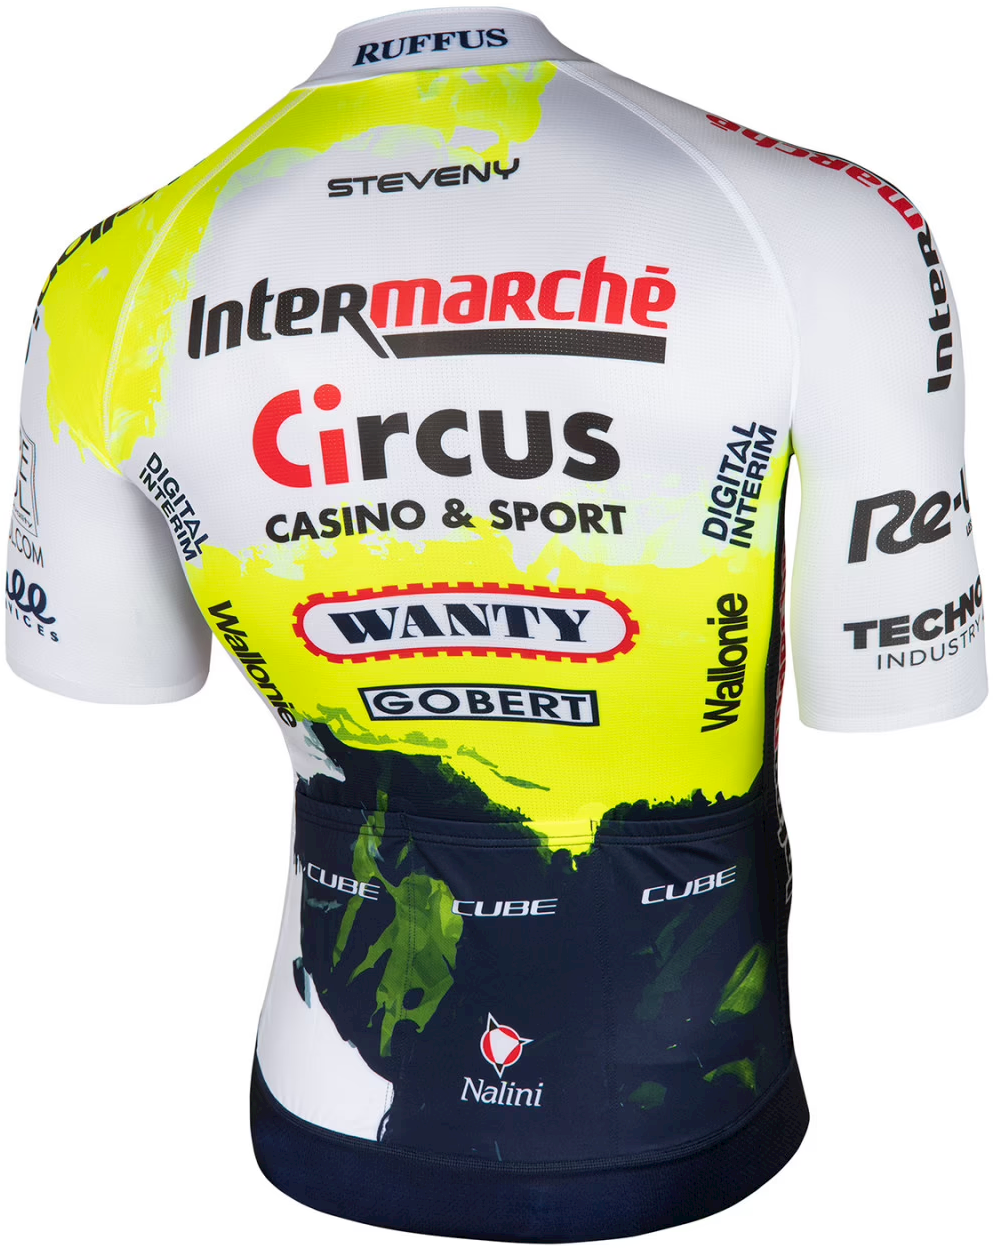 2023 Intermarche Circus Wanty Jersey Rear